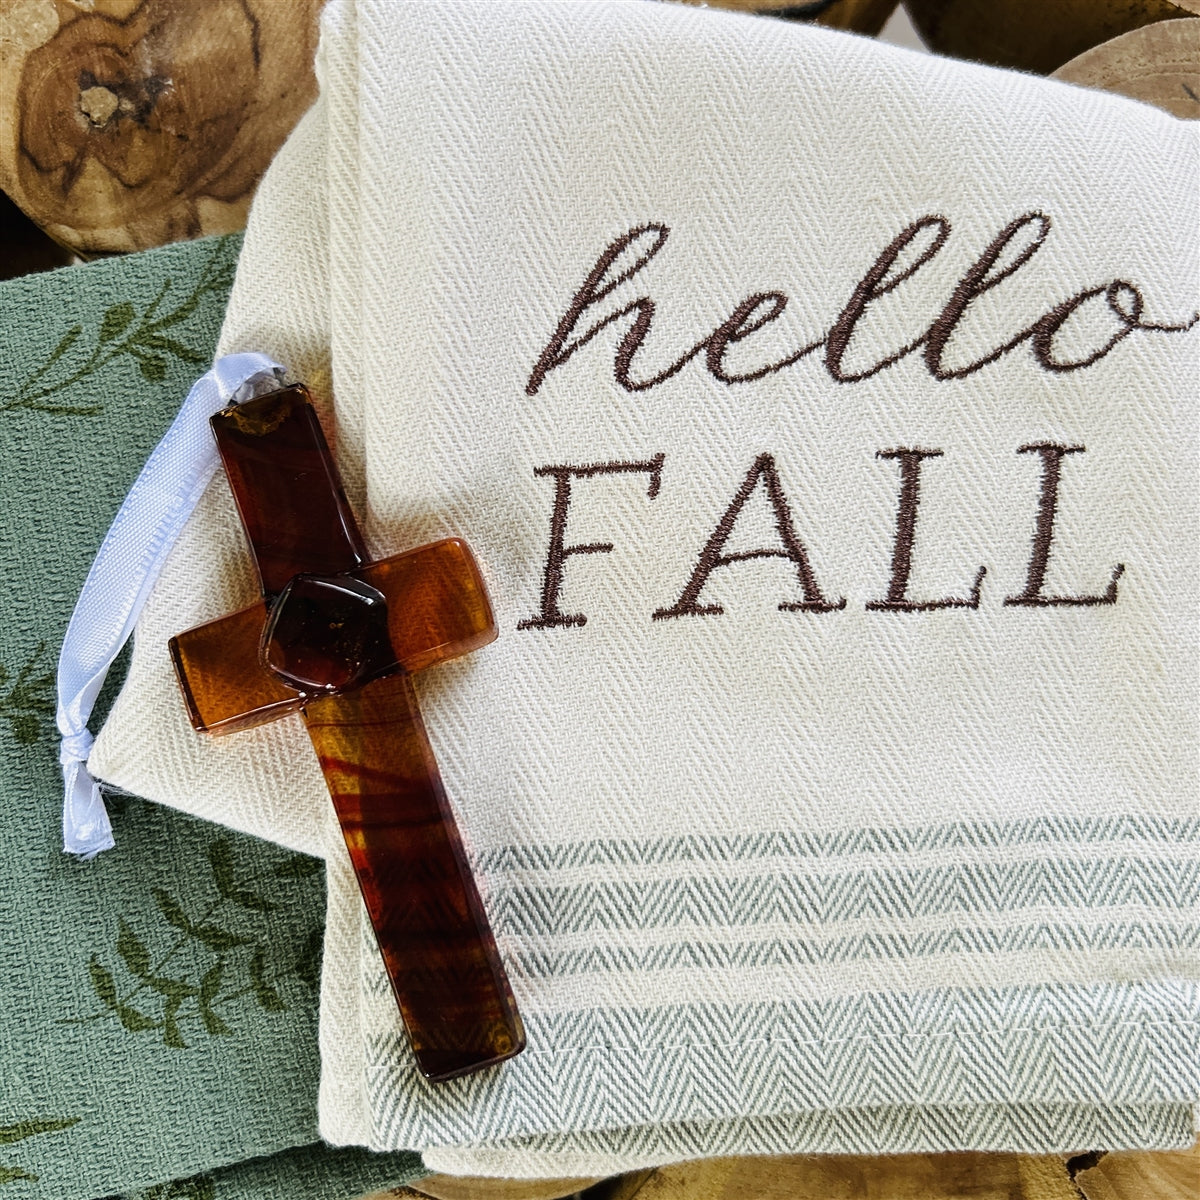 Amber/brown glass cross with white satin ribbon for hanging.